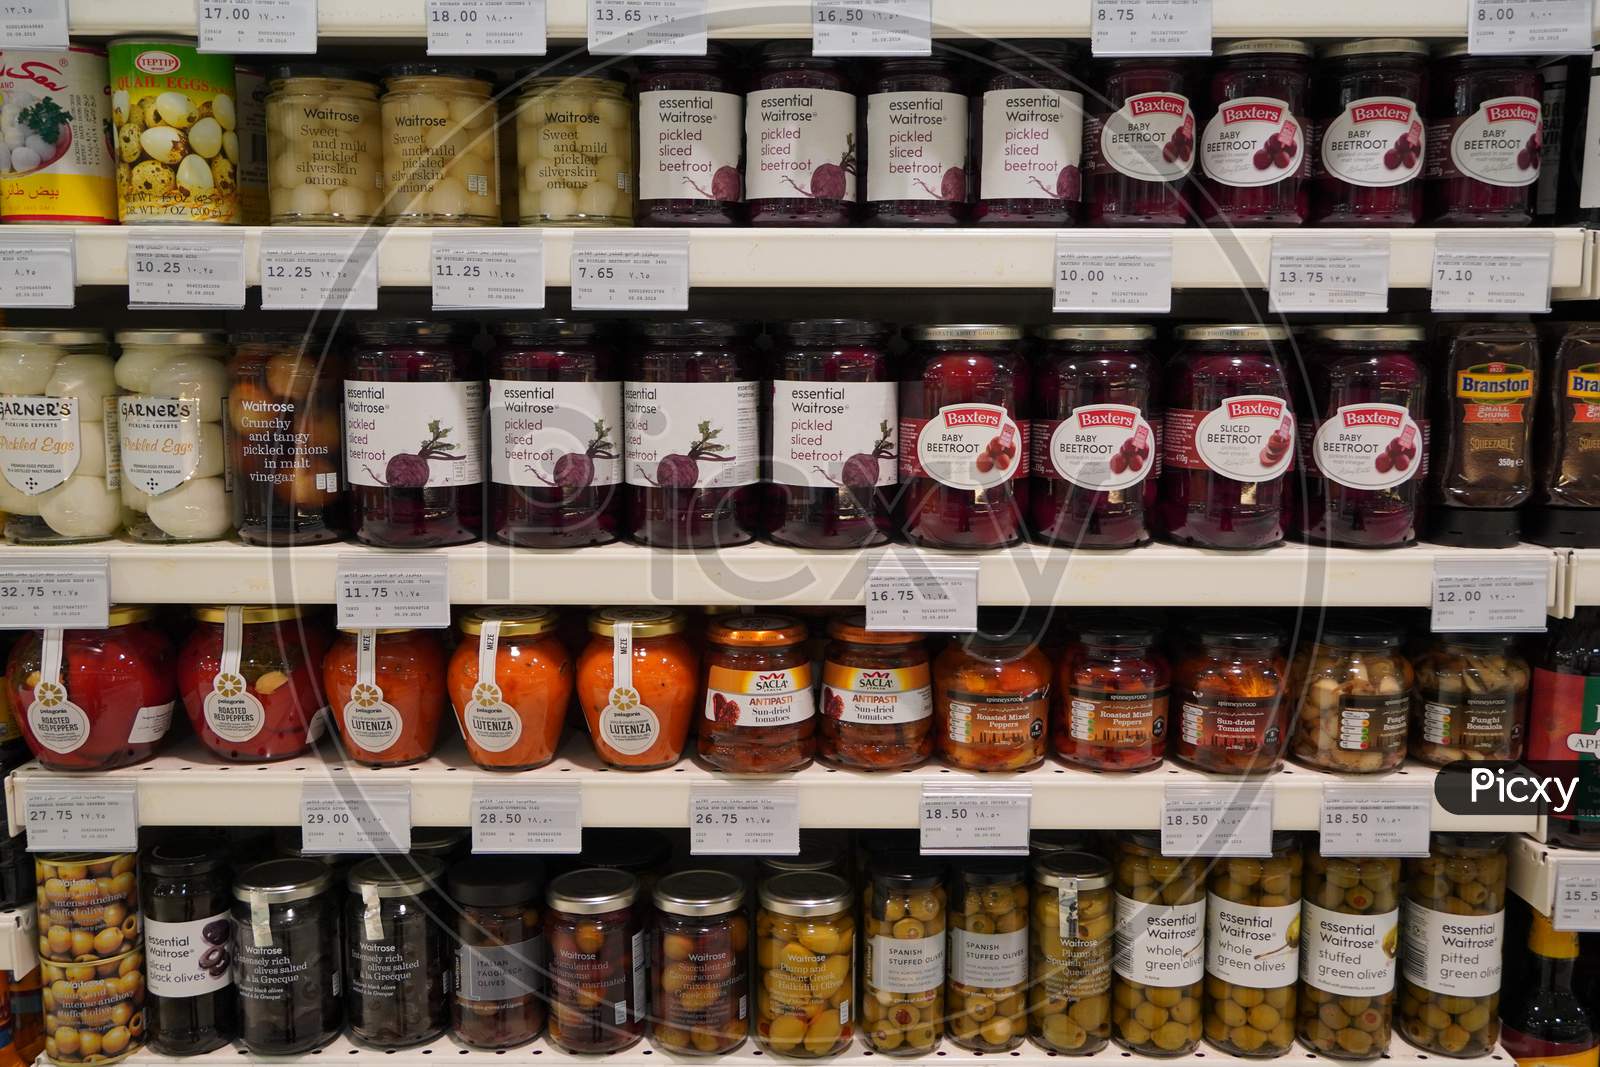 Traditional Turkish Pickles Of Various Fruits And Vegetables. Jars Of Salted Pickles On A Store Shelf. Beetroot, Olives, Cabbage, Cucumber, Onion, Tomato.